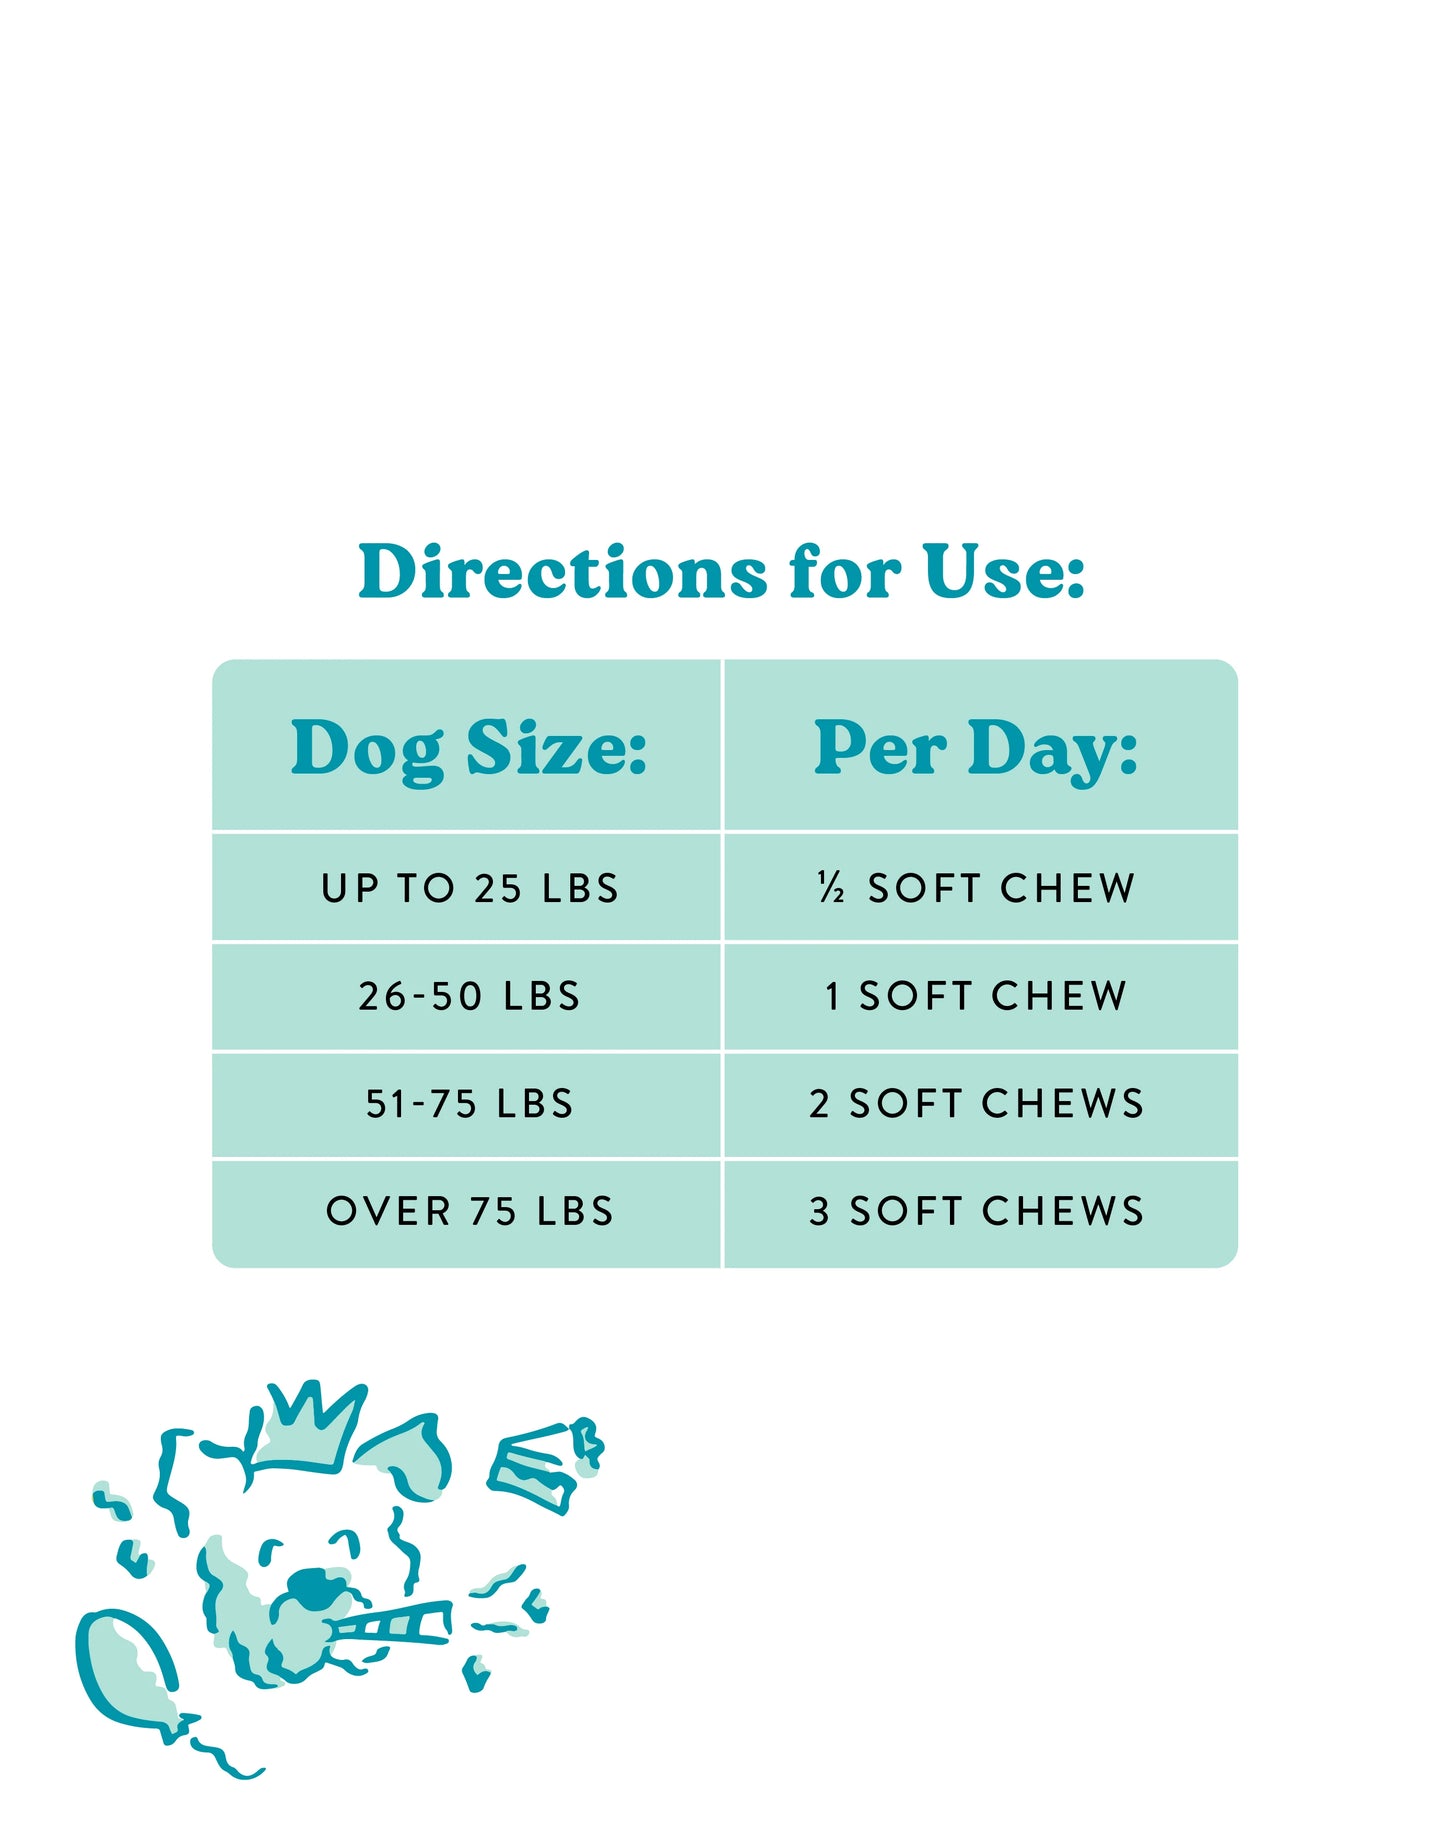 Multivitamin Supplement for Dogs